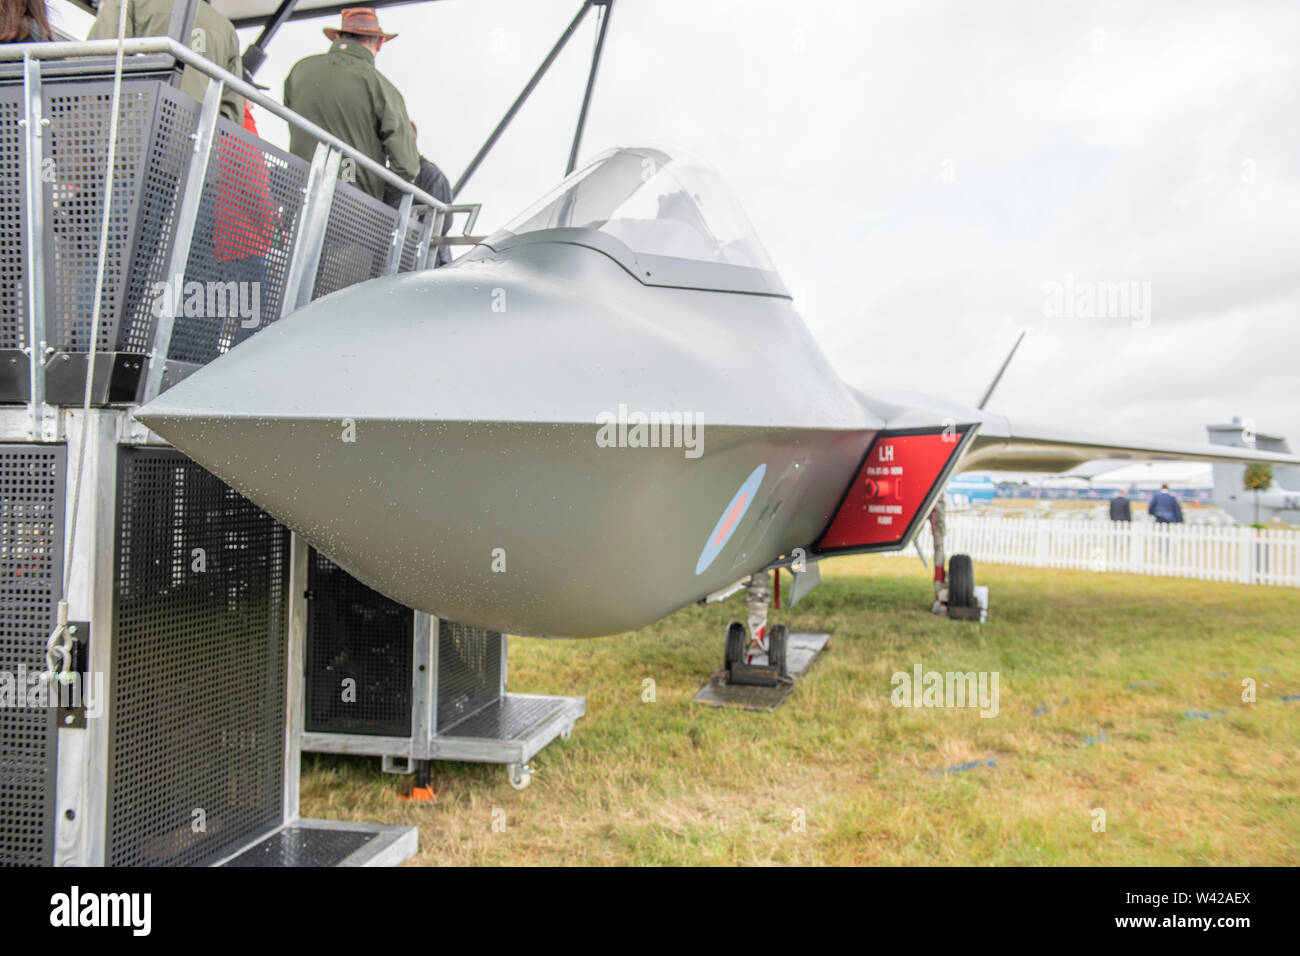 RAF Fairford, Glos, UK. 19th July 2019. Day 1 of The Royal International Air Tattoo (RIAT) with military aircraft from around the world assembling for the world’s greatest airshow which runs from 19-21 July. Image: Full size mock-up of the new 6th generation BaE Systems Tempest stealth fighter concept. Credit: Malcolm Park/Alamy Live News. Stock Photo